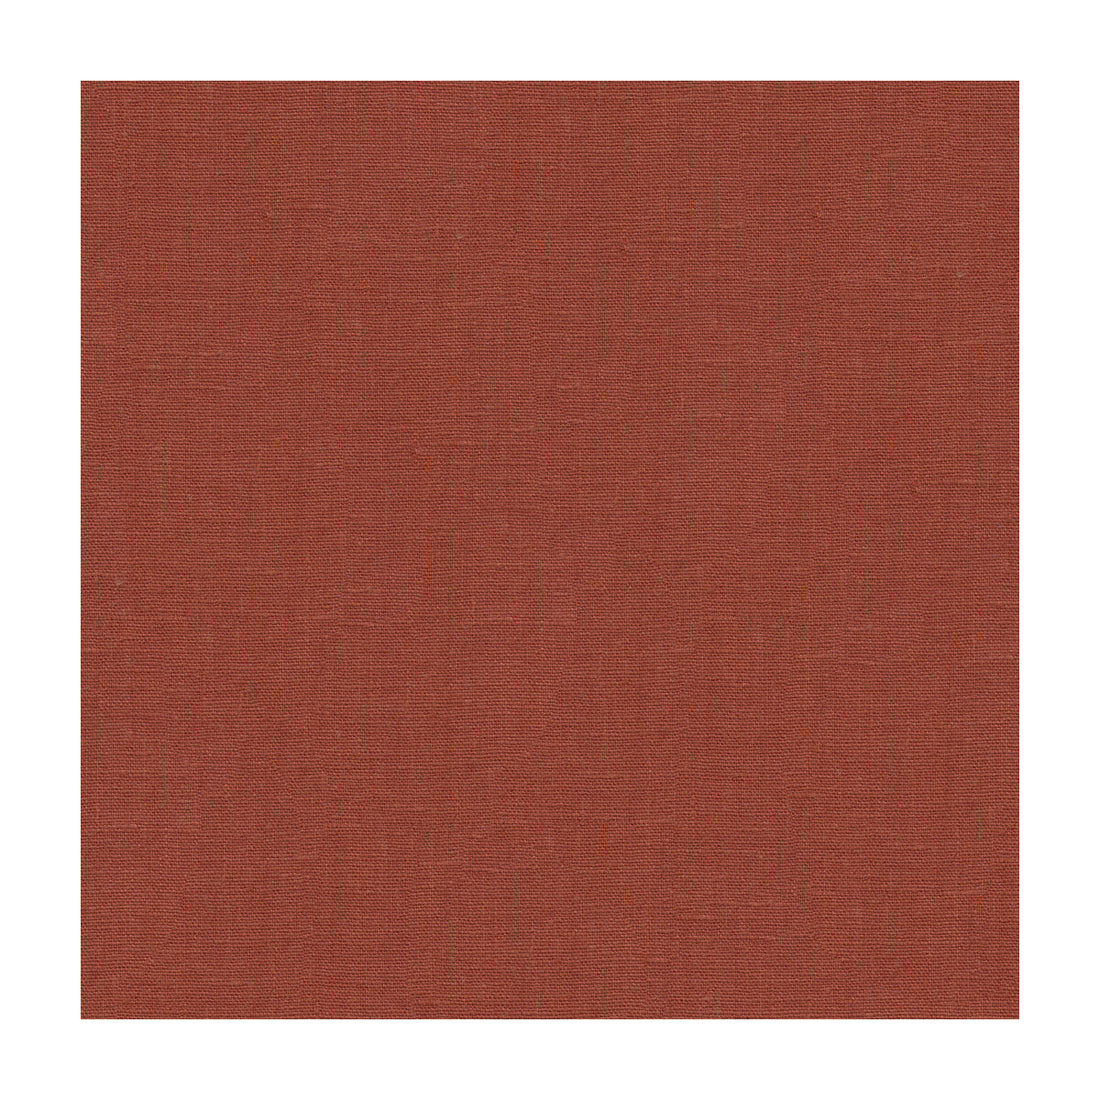 Dublin Linen fabric in spice color - pattern 2012175.24.0 - by Lee Jofa in the Colour Complements II collection